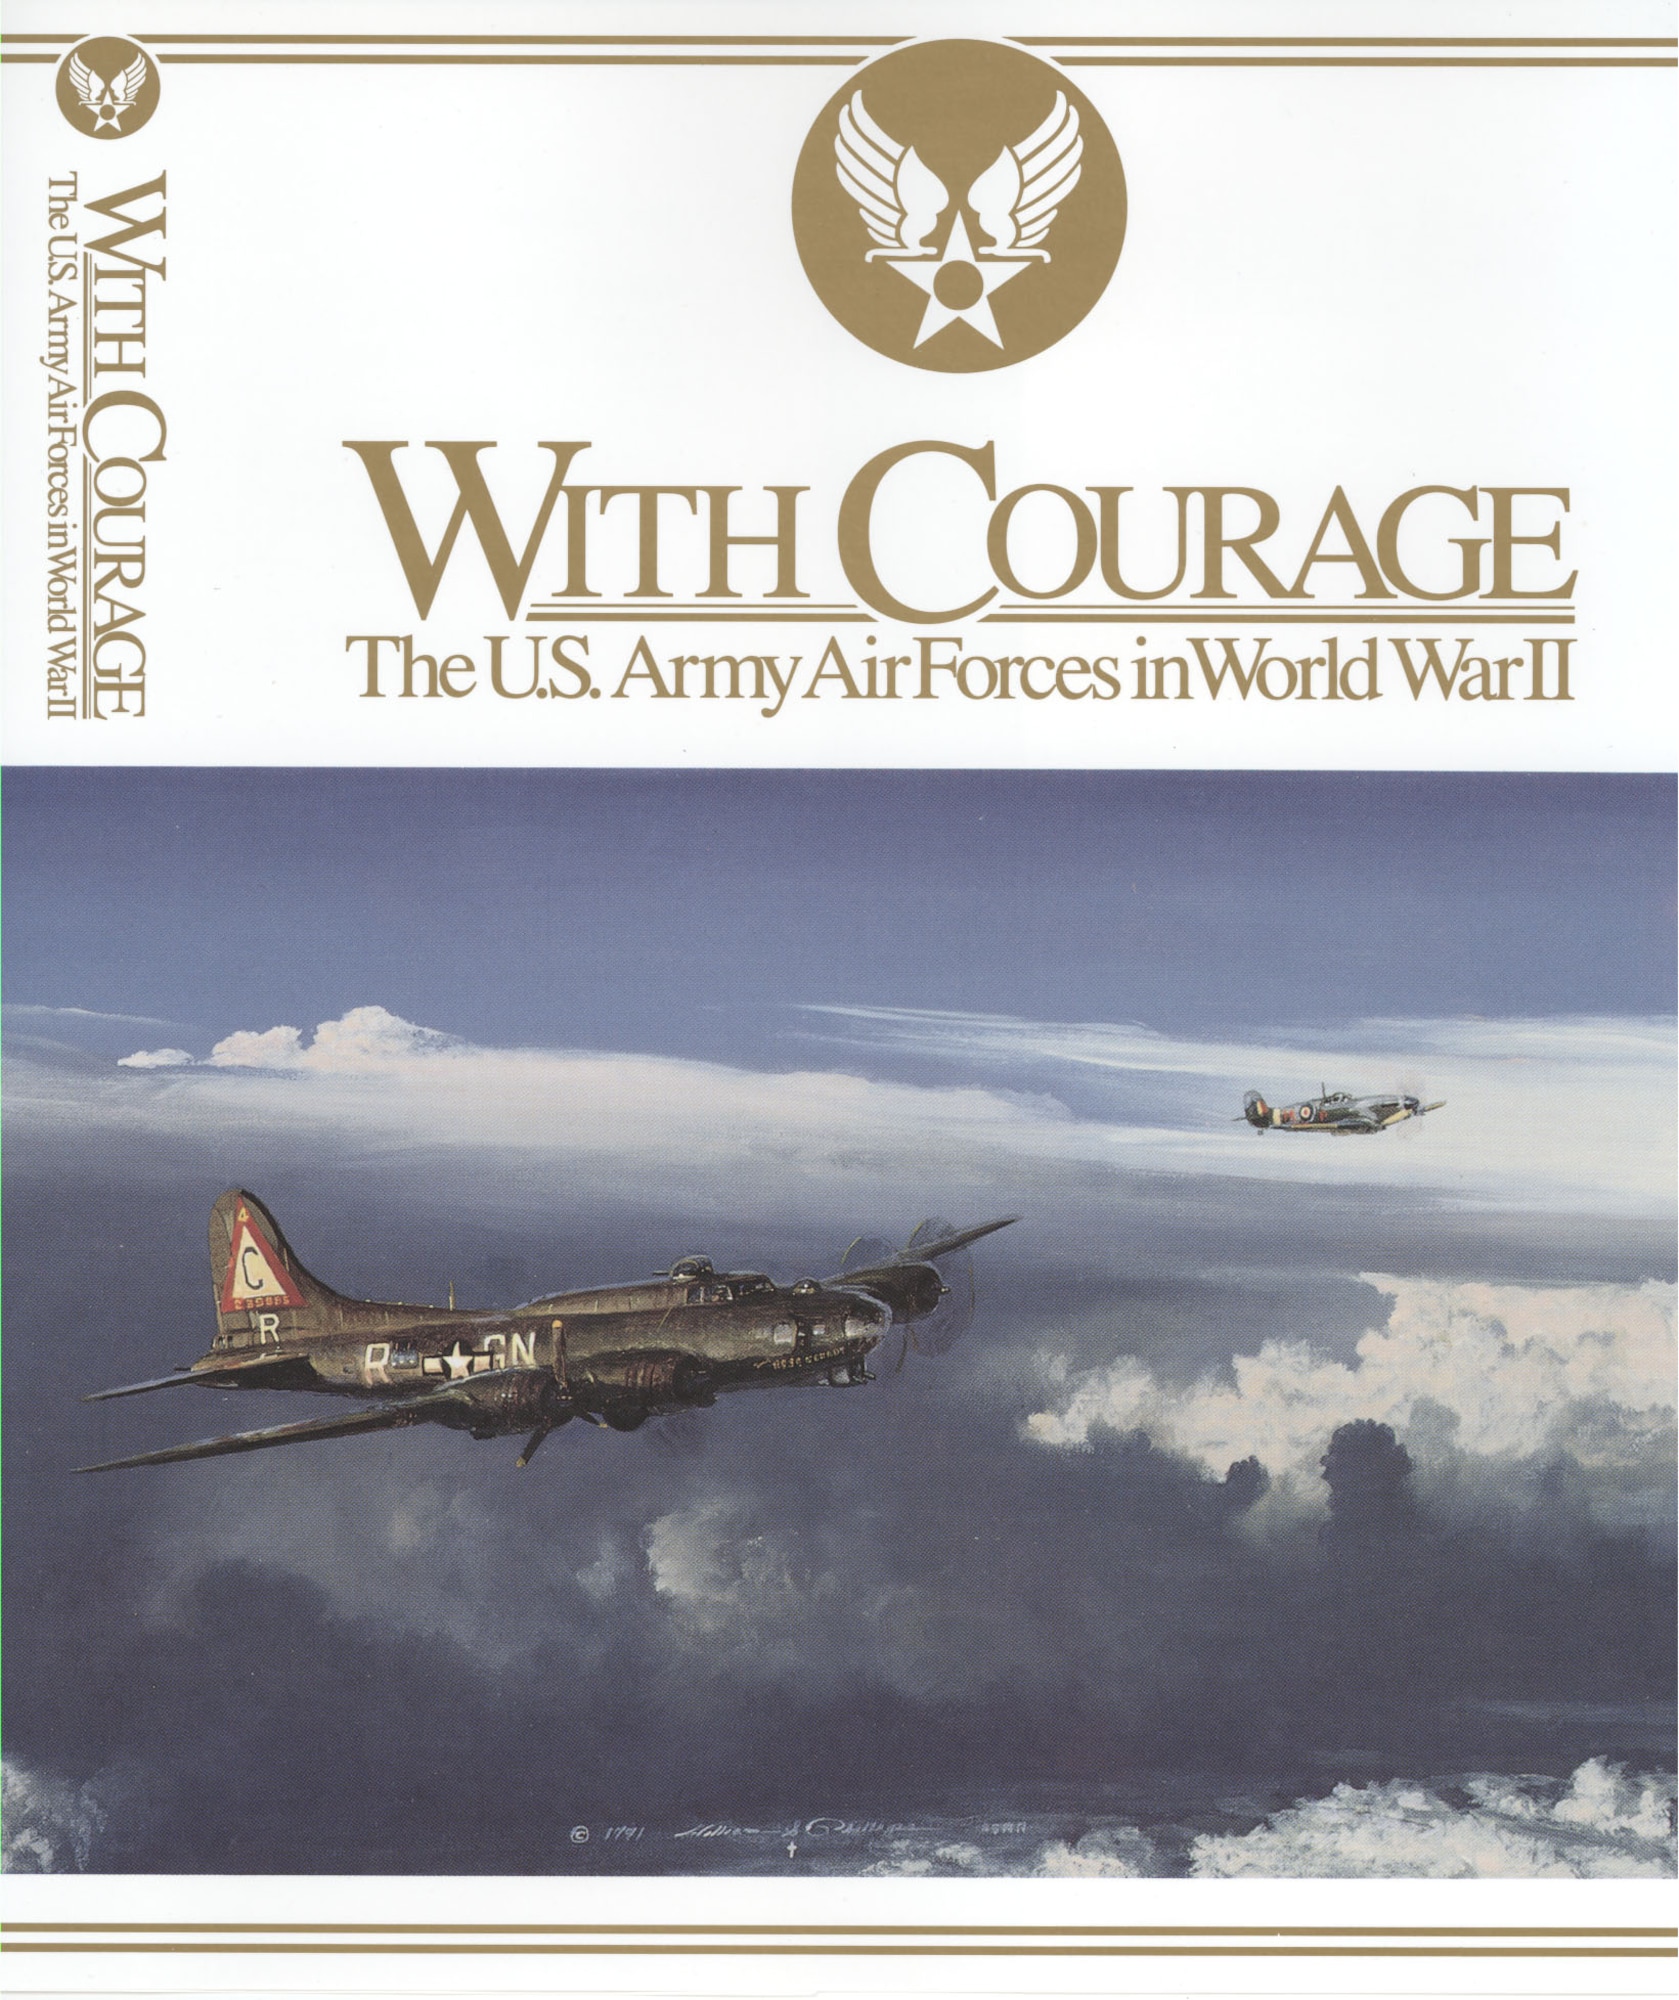 The U.S. Army Air Forces in World War II